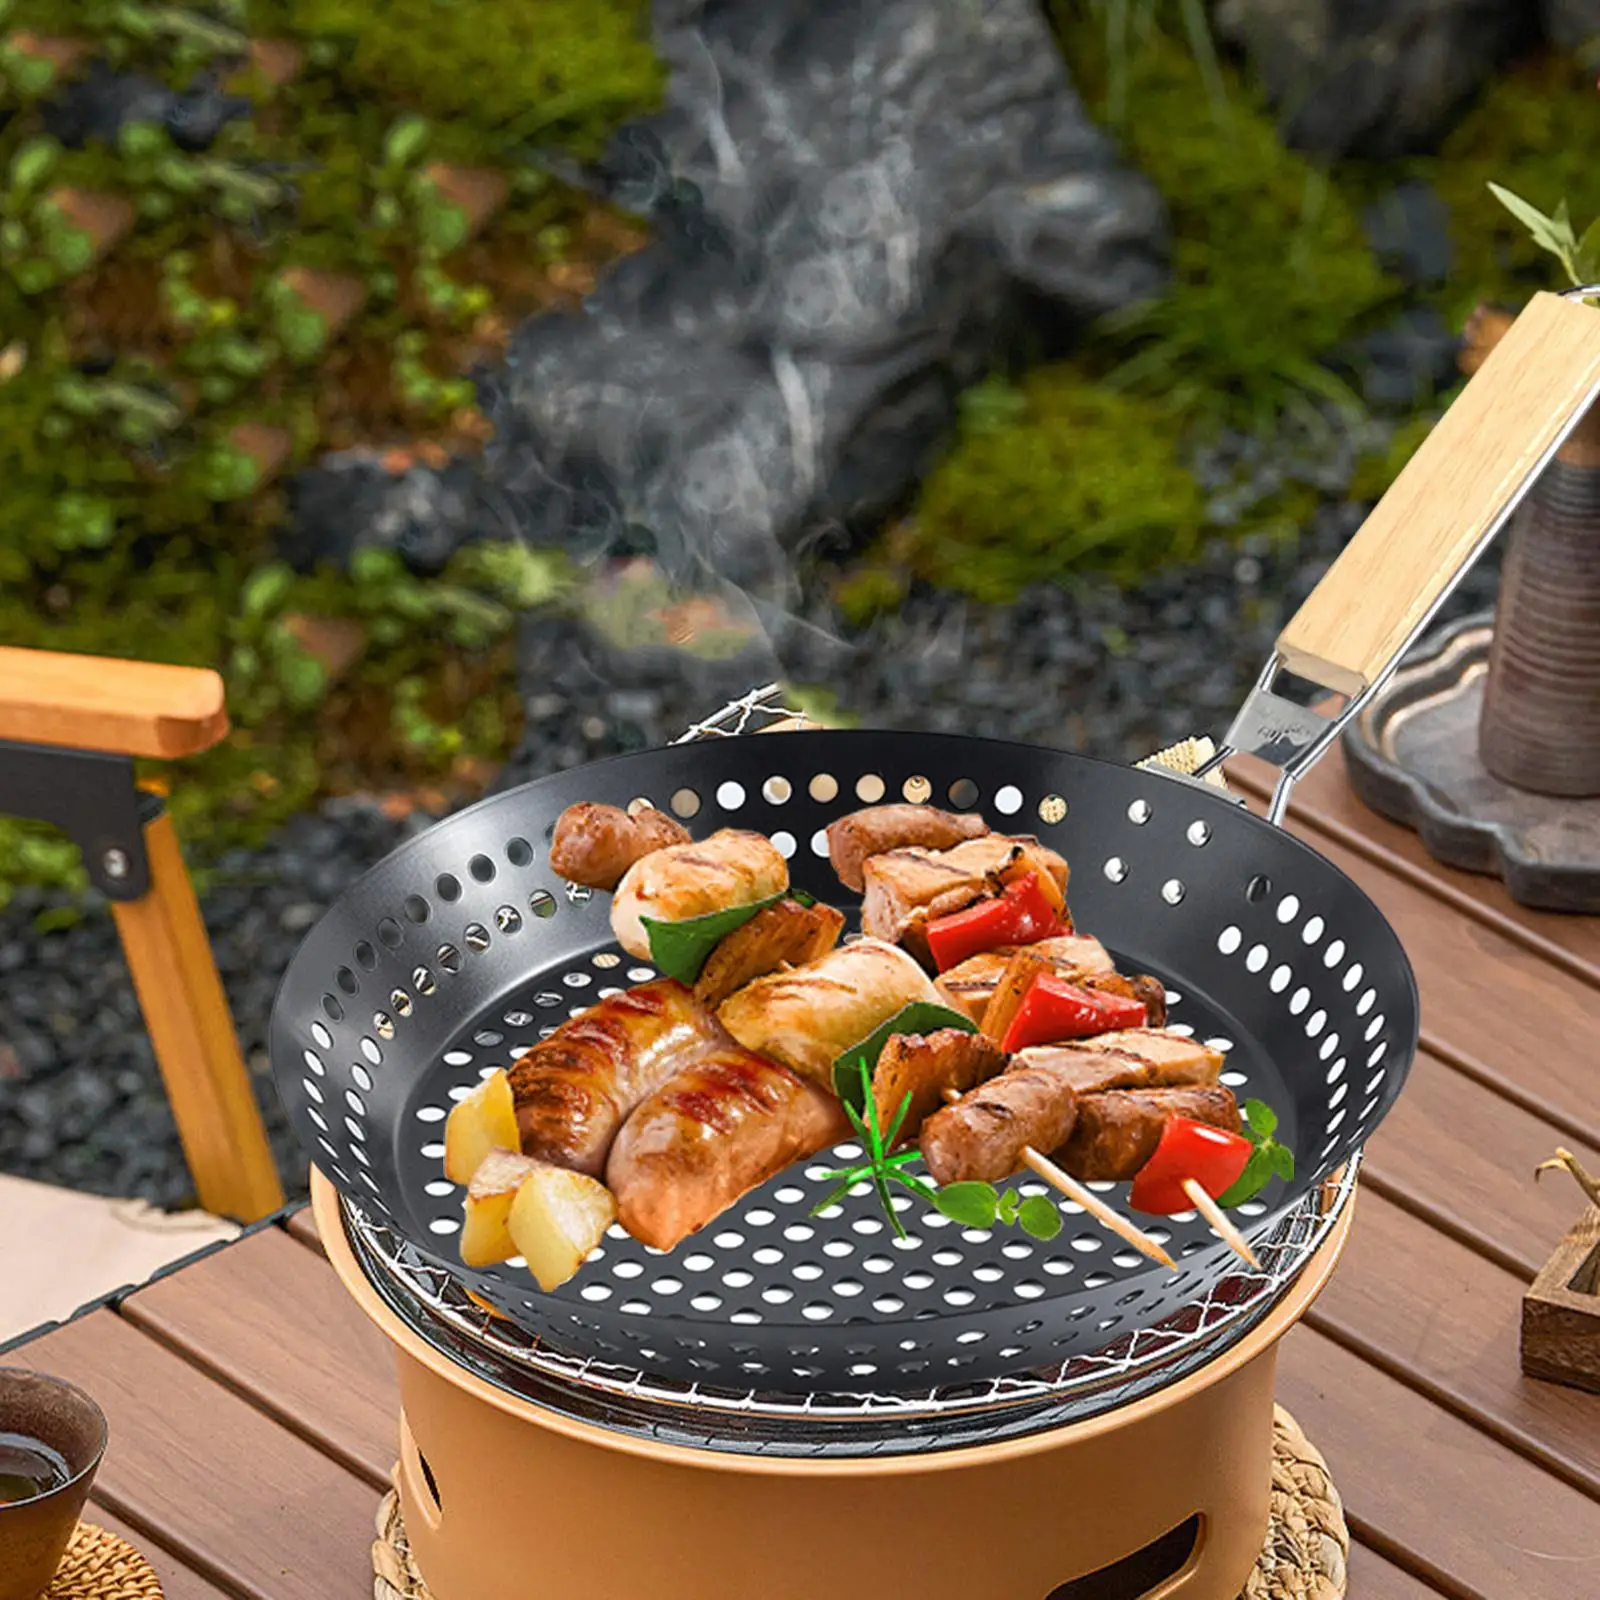 Bakeware Grill Pan Frying Pan Folding Handle Cooking Pan Barbecue Grilling Plate for Hiking Kitchen Baking Travel Backpacking